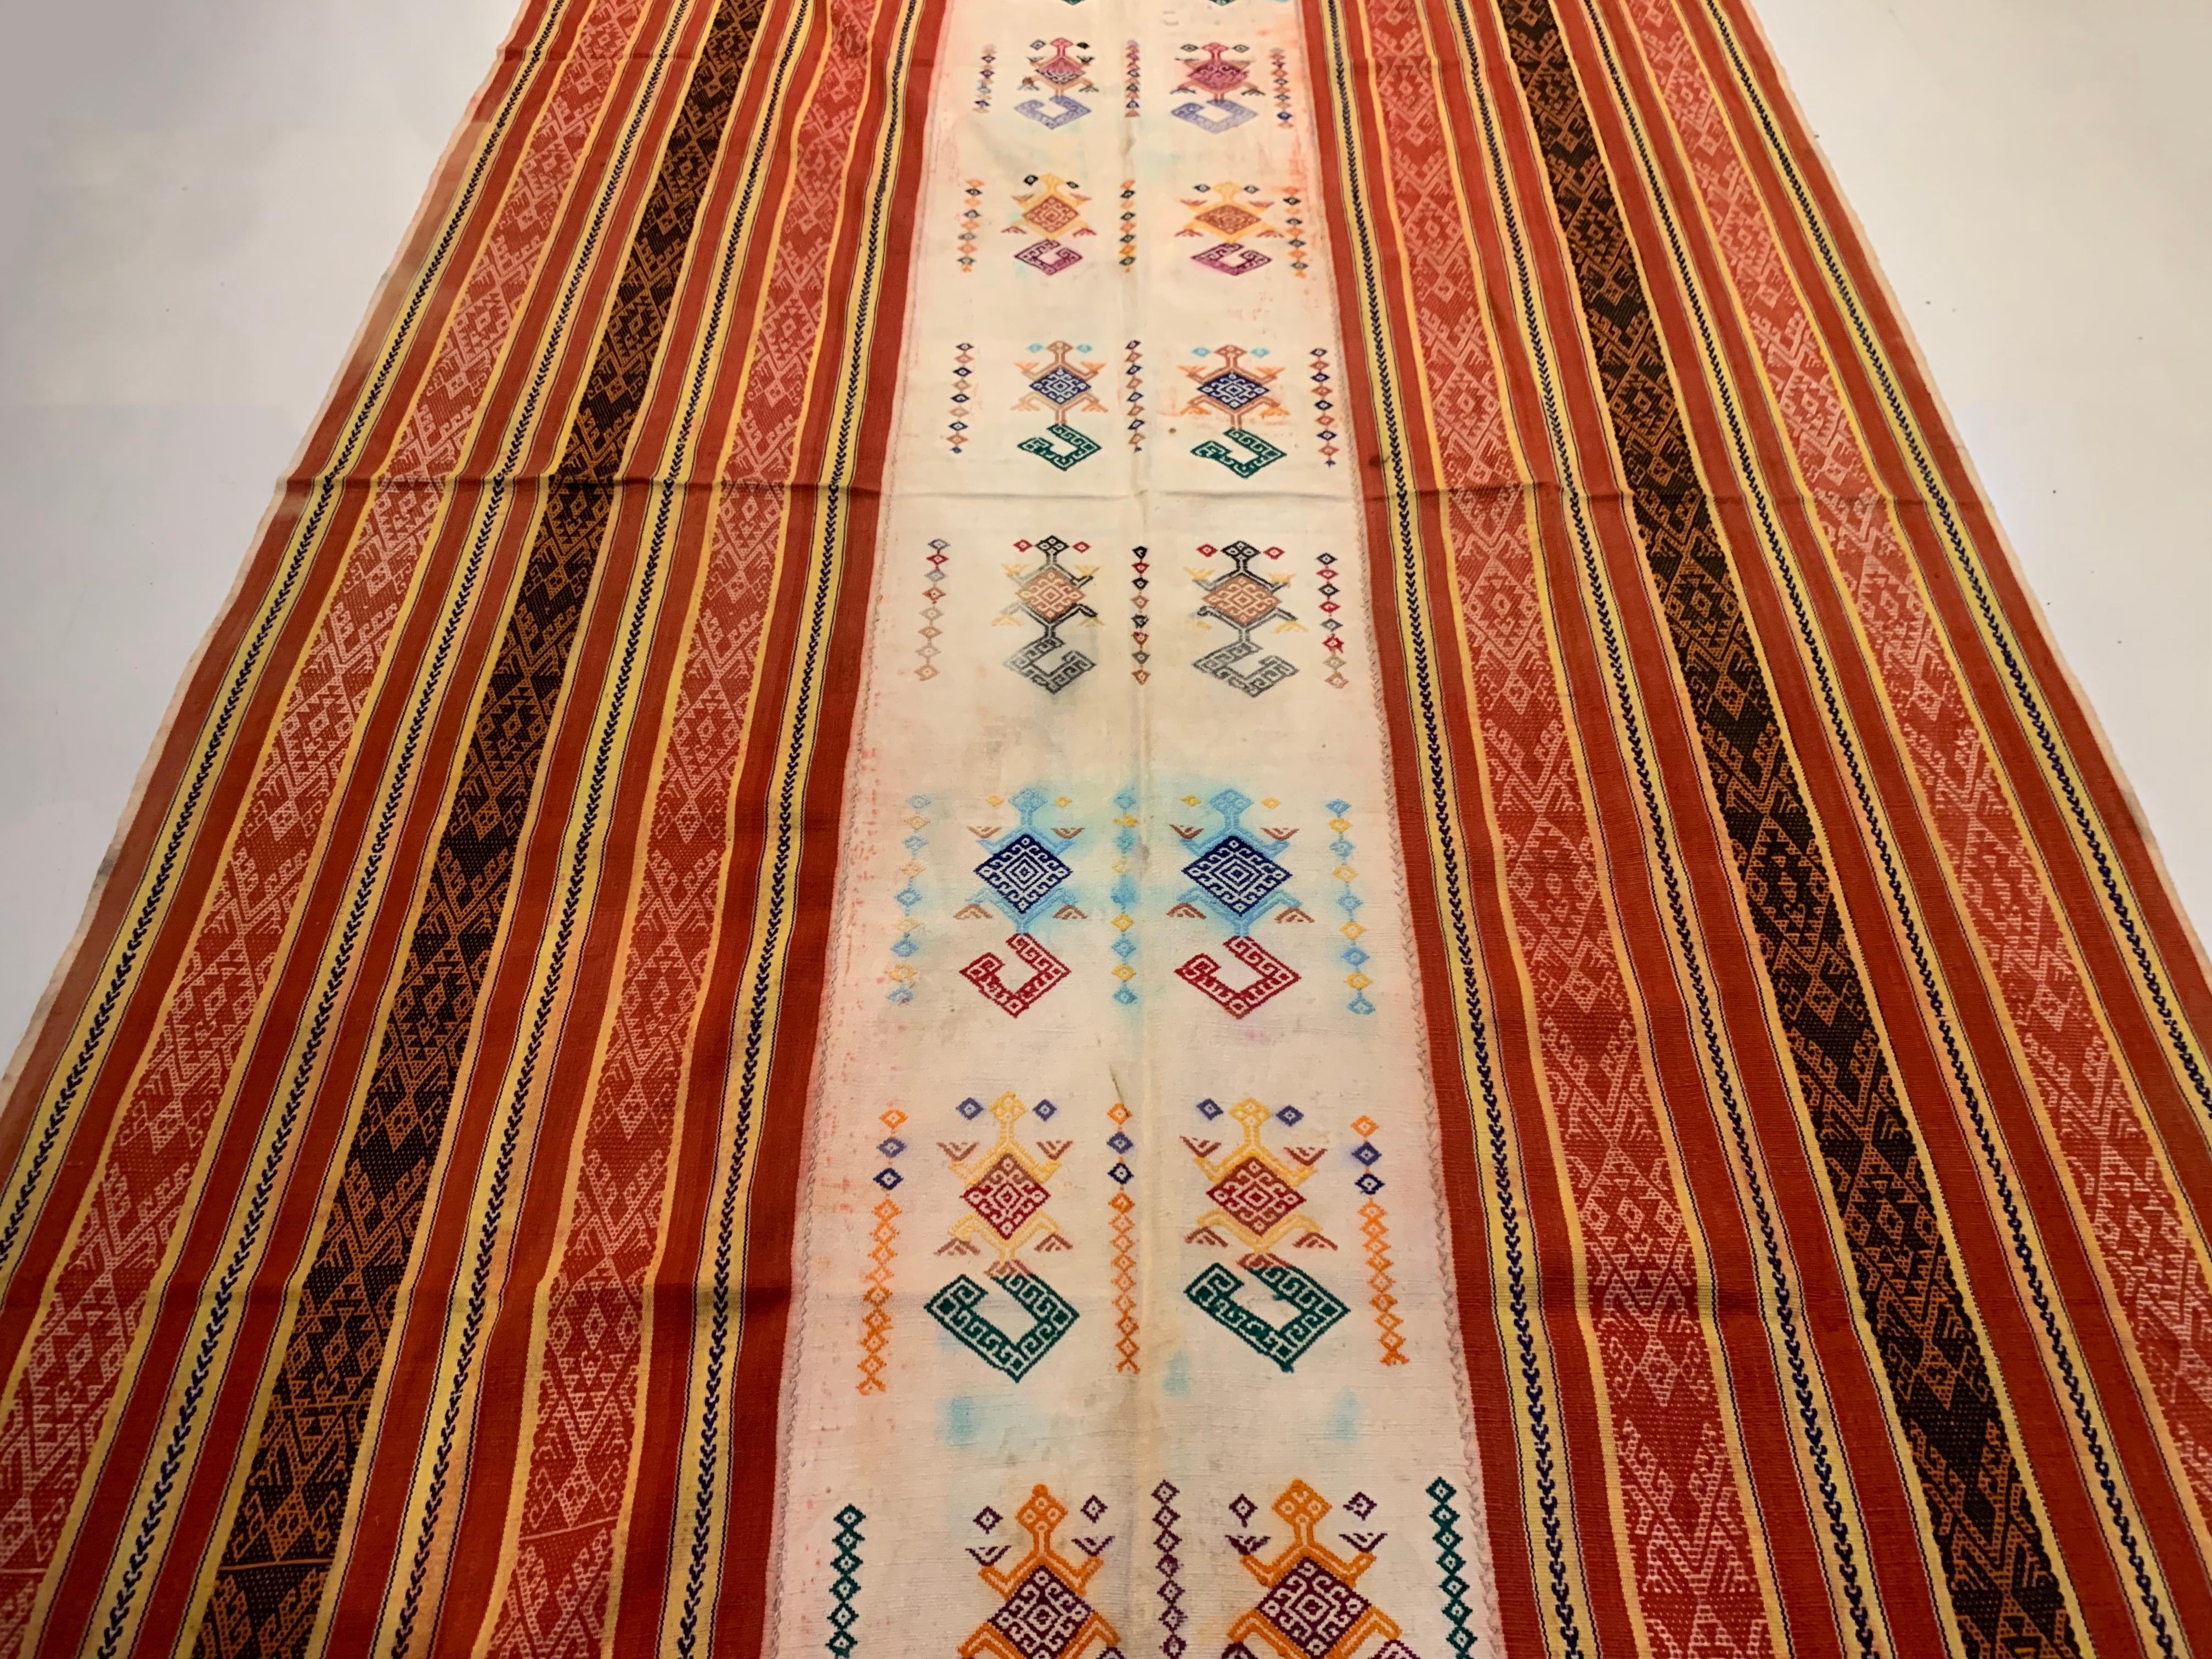 An wonderful example of a west timor ikat textile. It is hand-woven using naturally dyed yarns via a method passed on through generations. It features a stunning array of distinct tribal patterns and bright colours. Timorese ikats such as this one